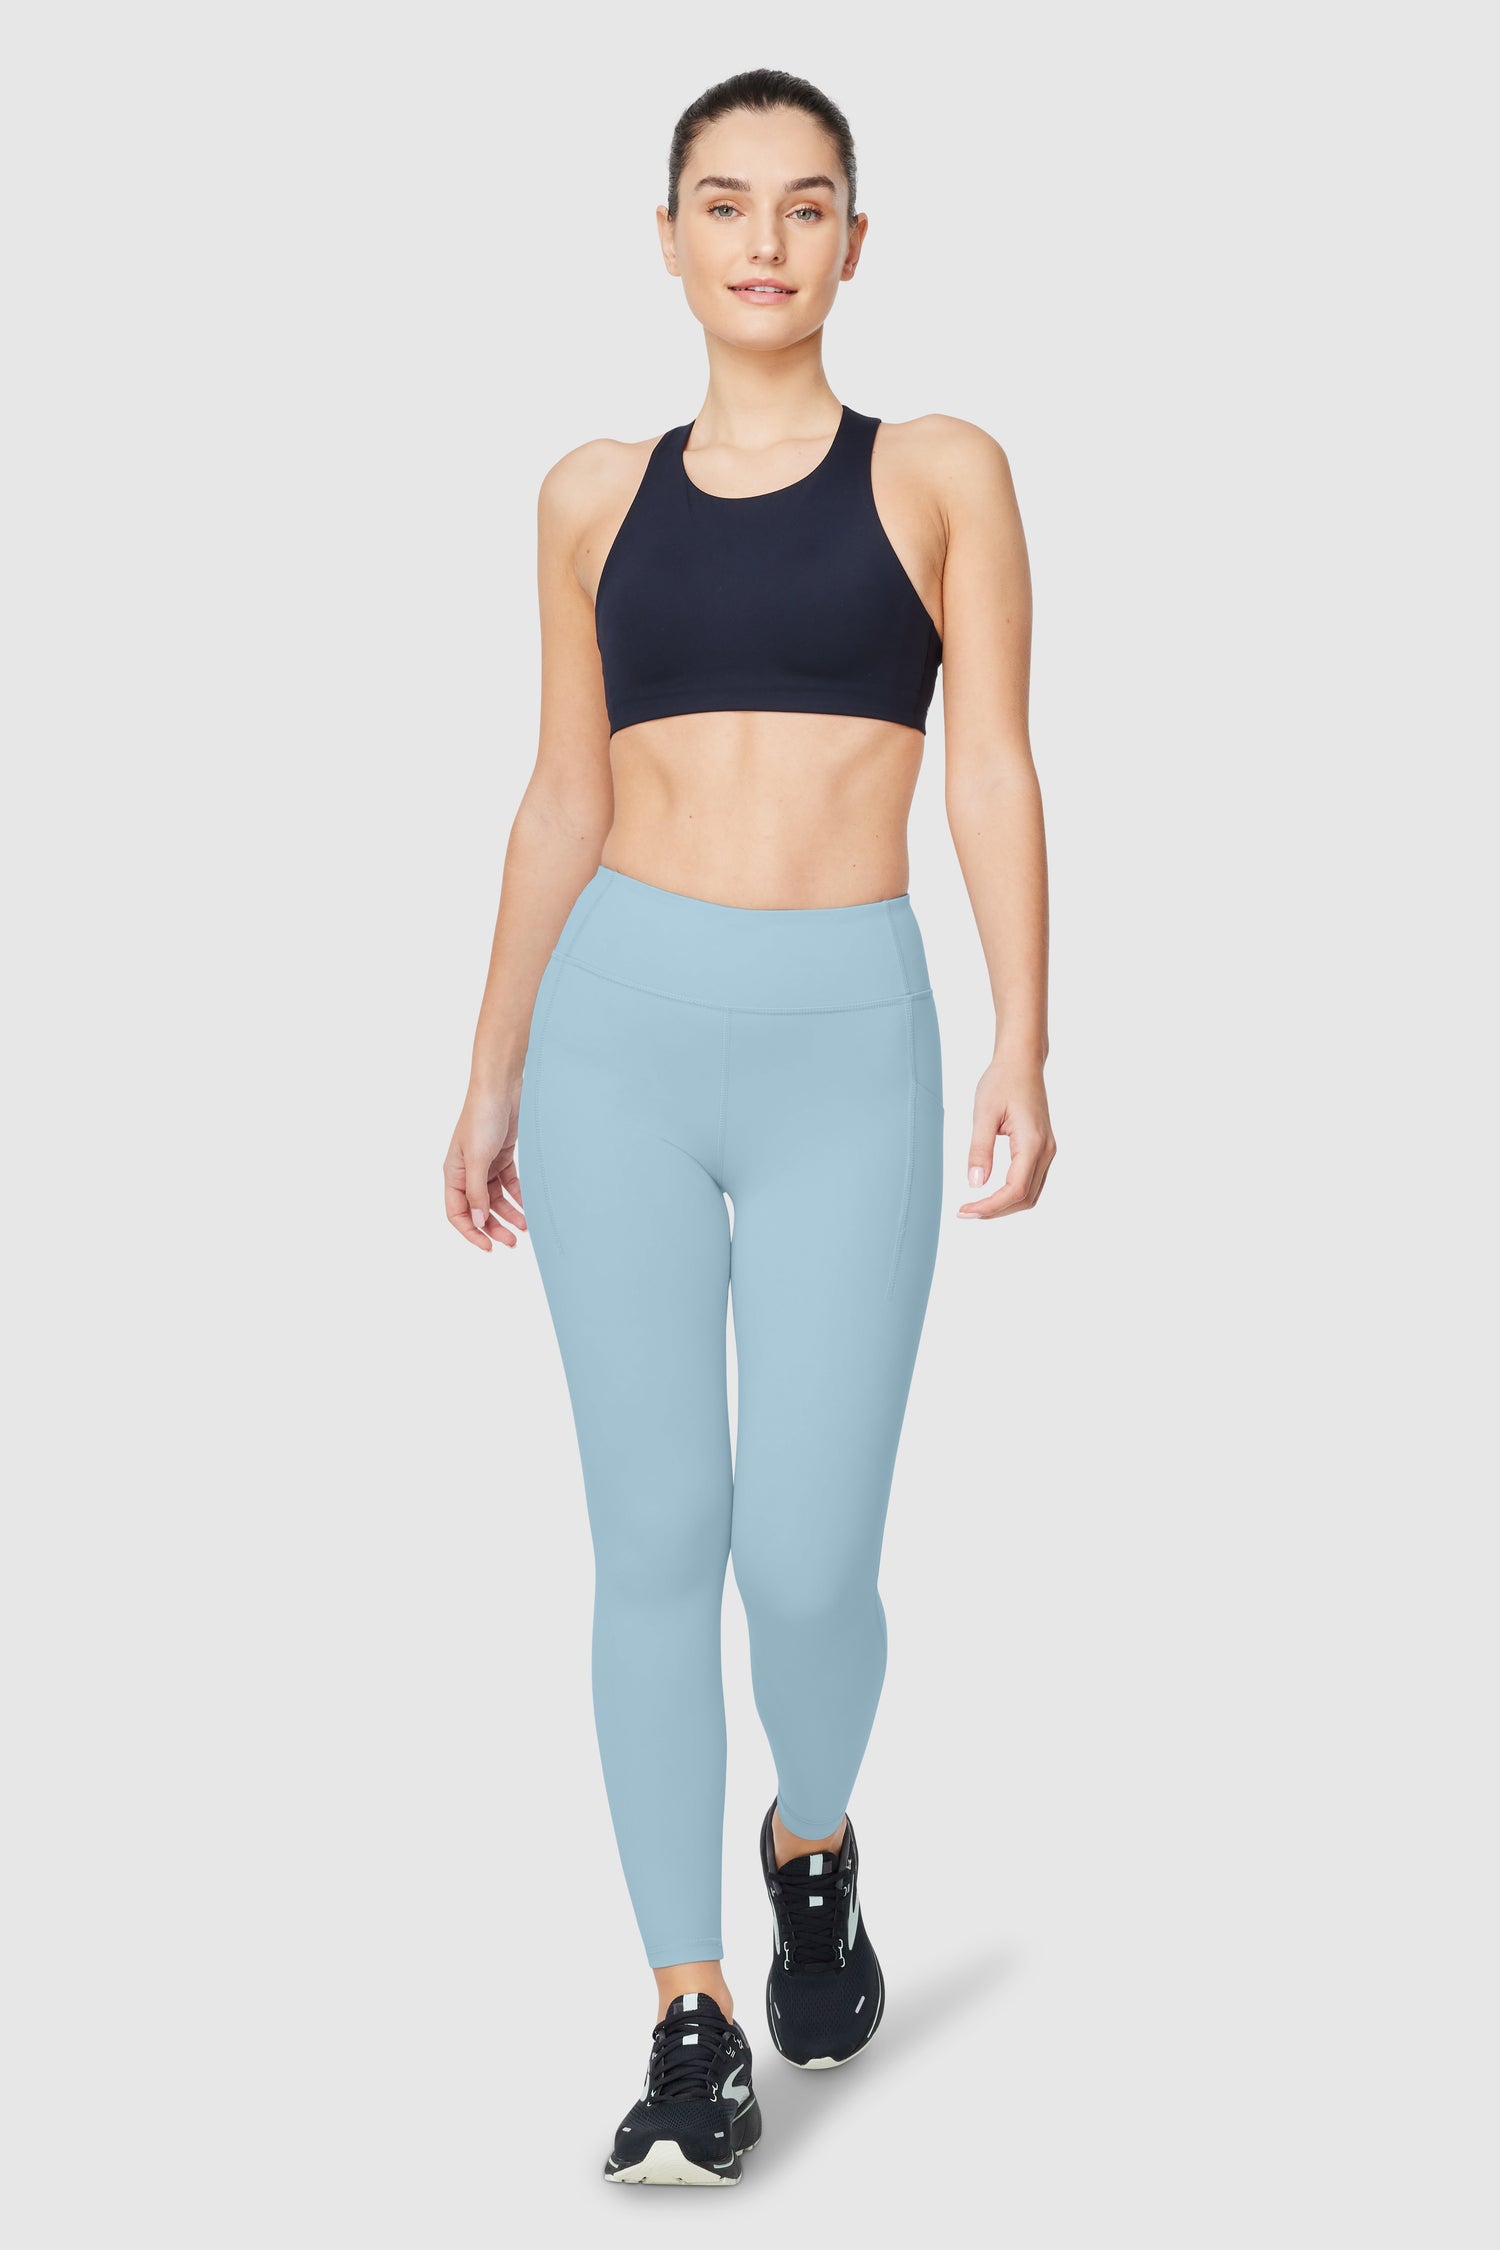 Buy fly N feet - Premium Quality Solid Color Cotton Lycra Leggings